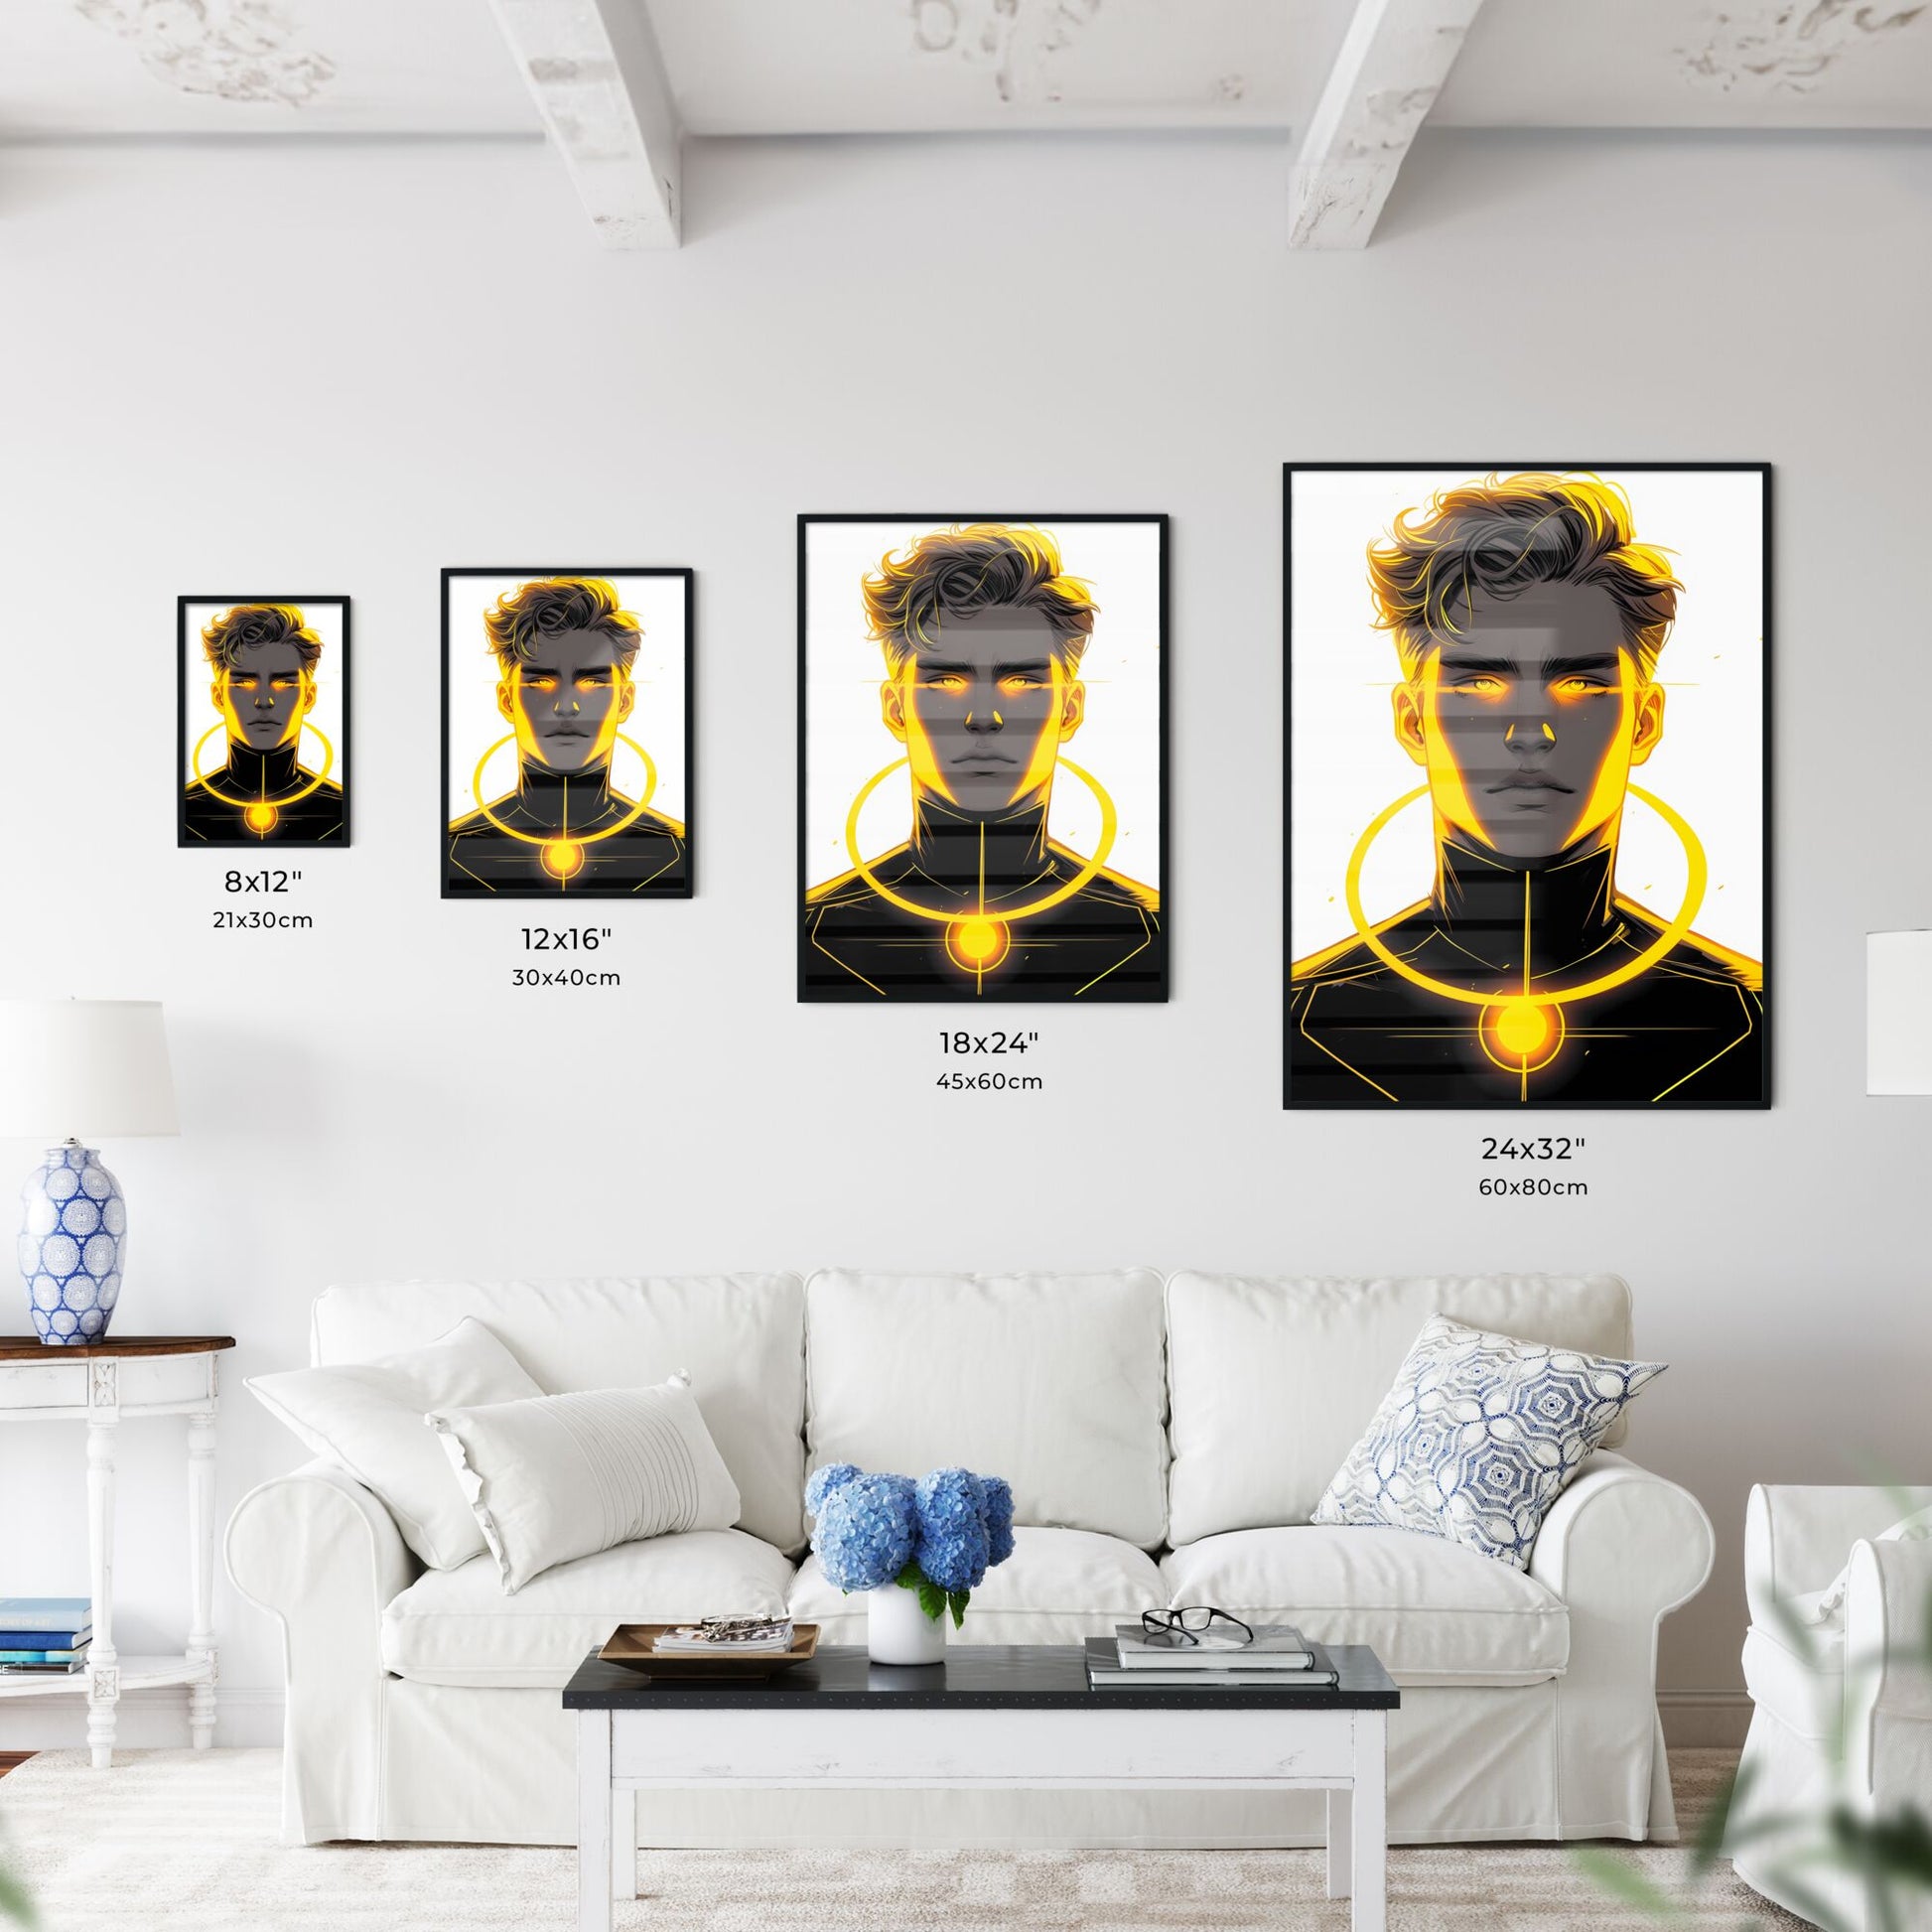 Saint - Art print of a man with yellow glowing eyes Default Title